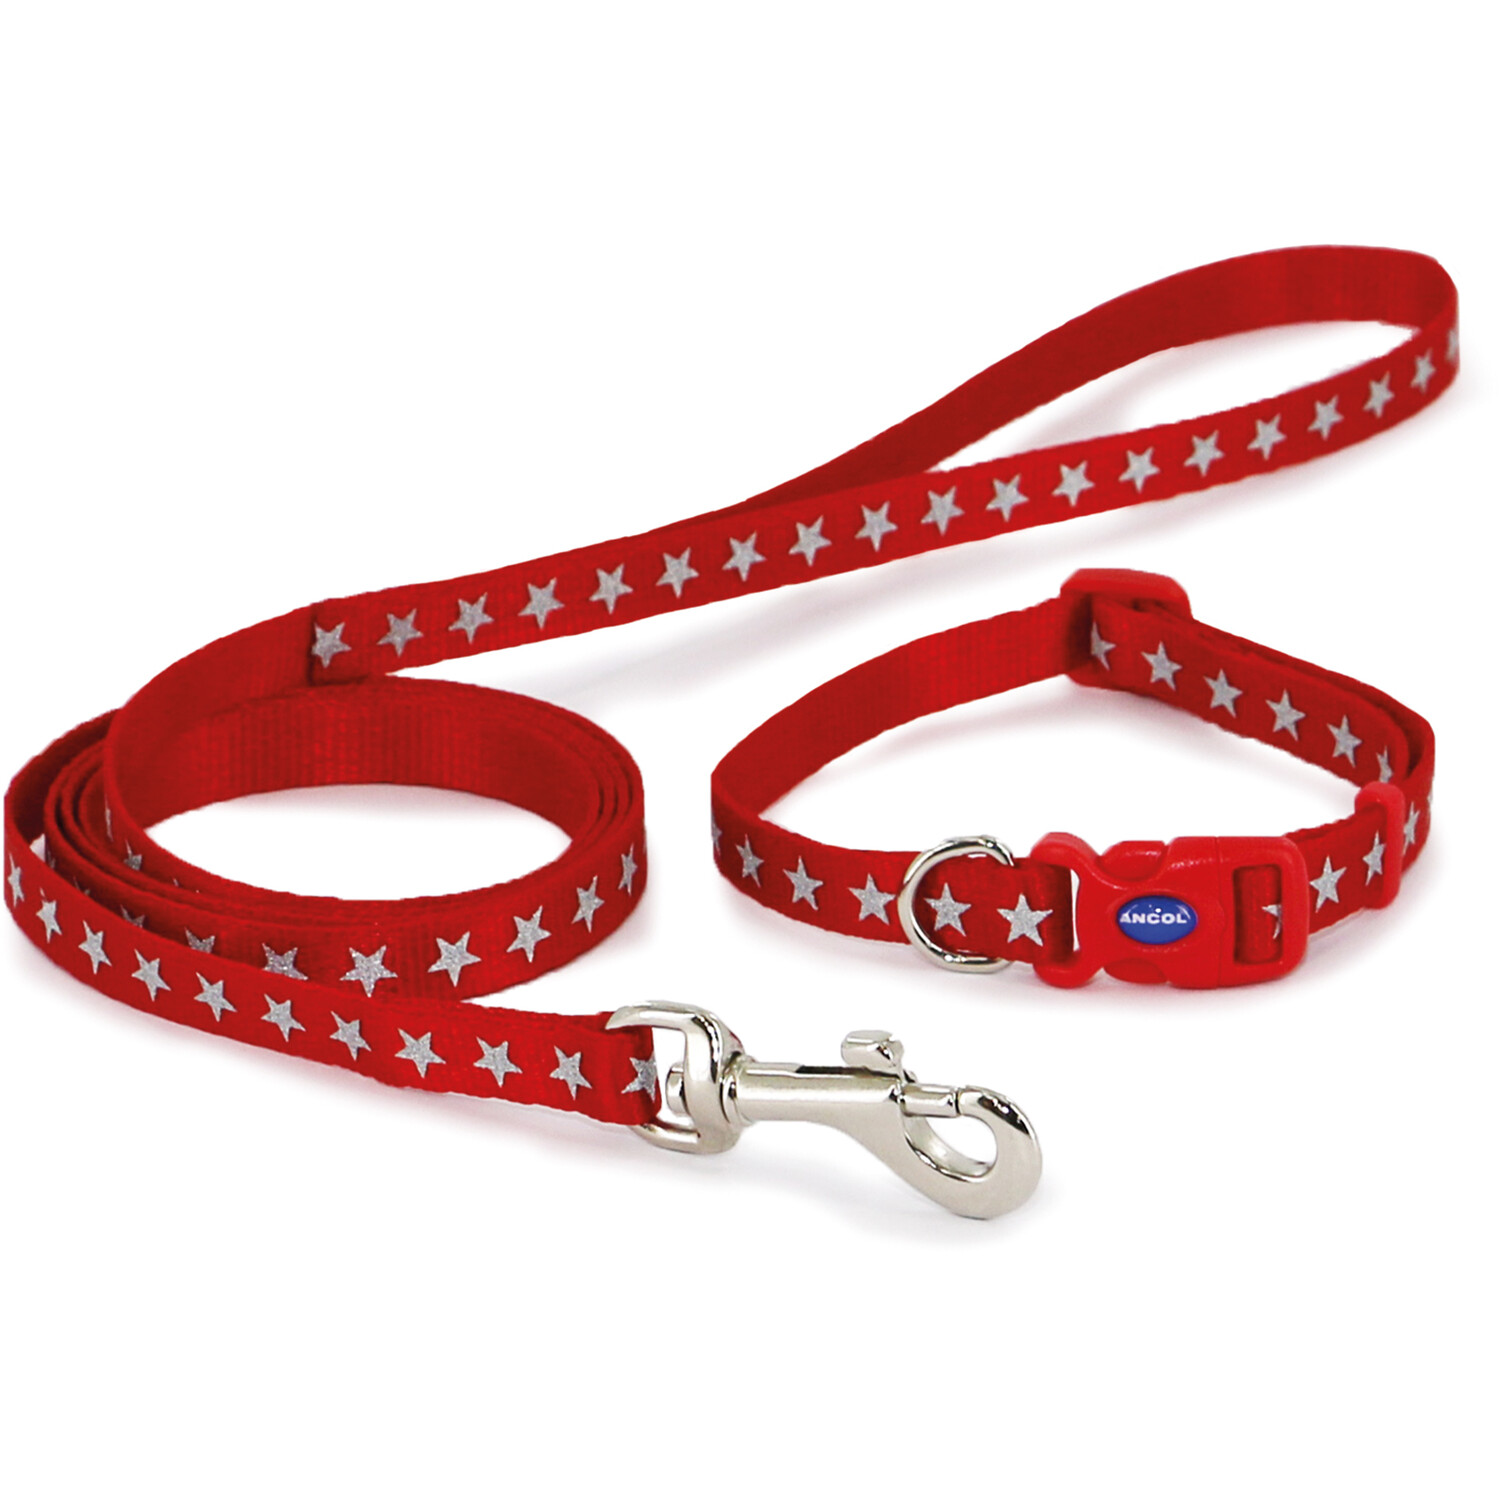 Small Bite Reflective Collar and Lead Set  - Red Image